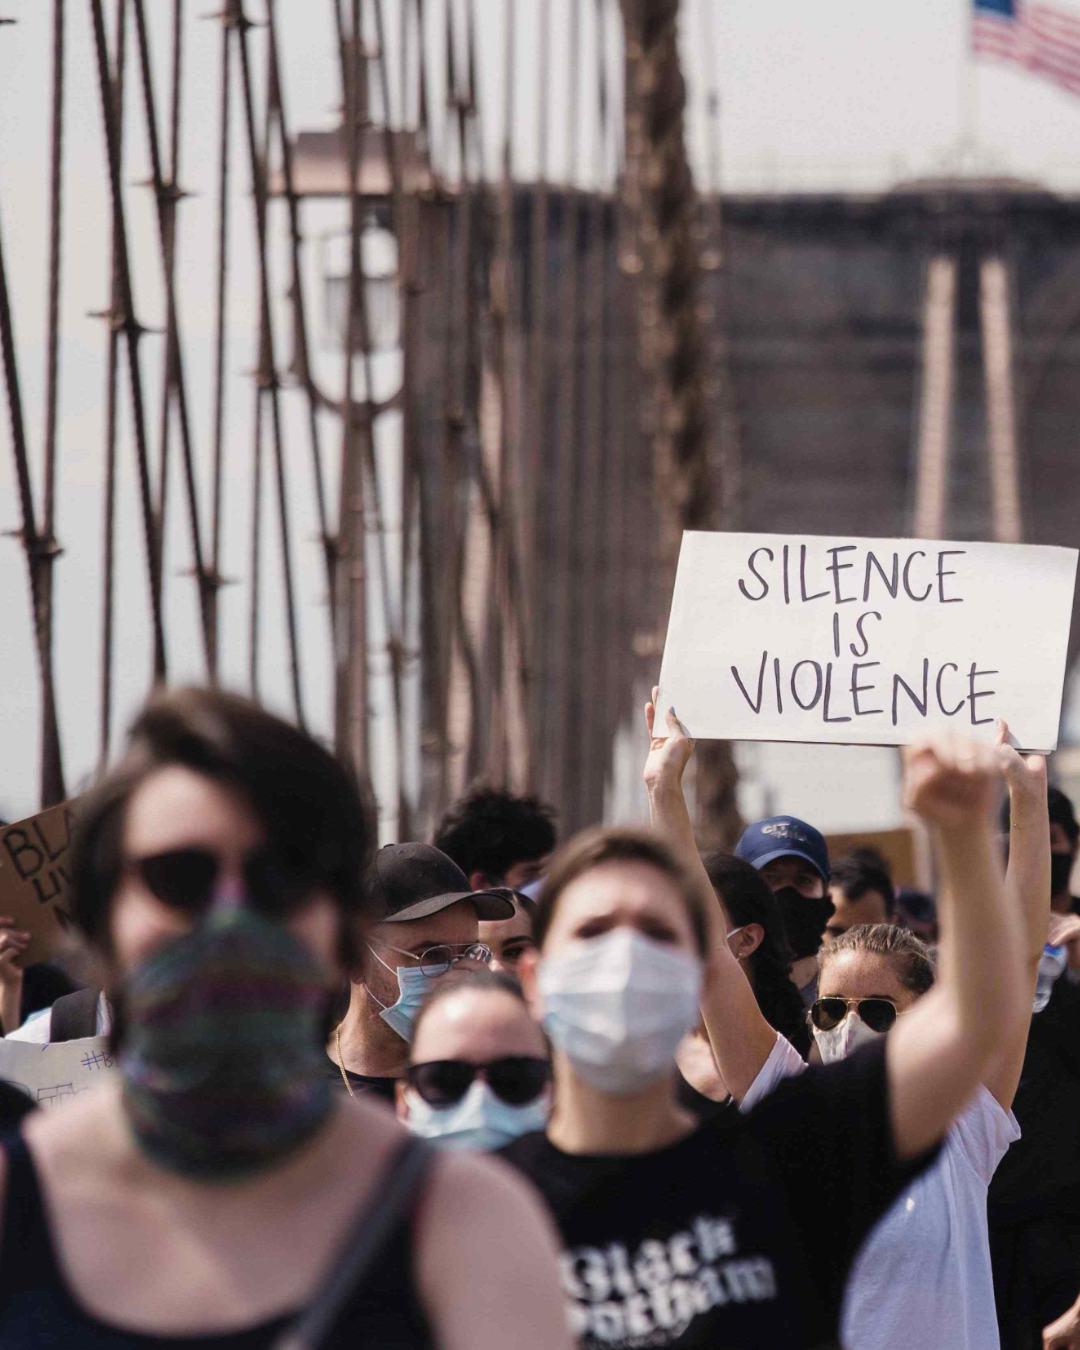 A crowd of individuals marching across a bridge. Some individuals hold signs that say "silence is violence" and "no justice no peace".